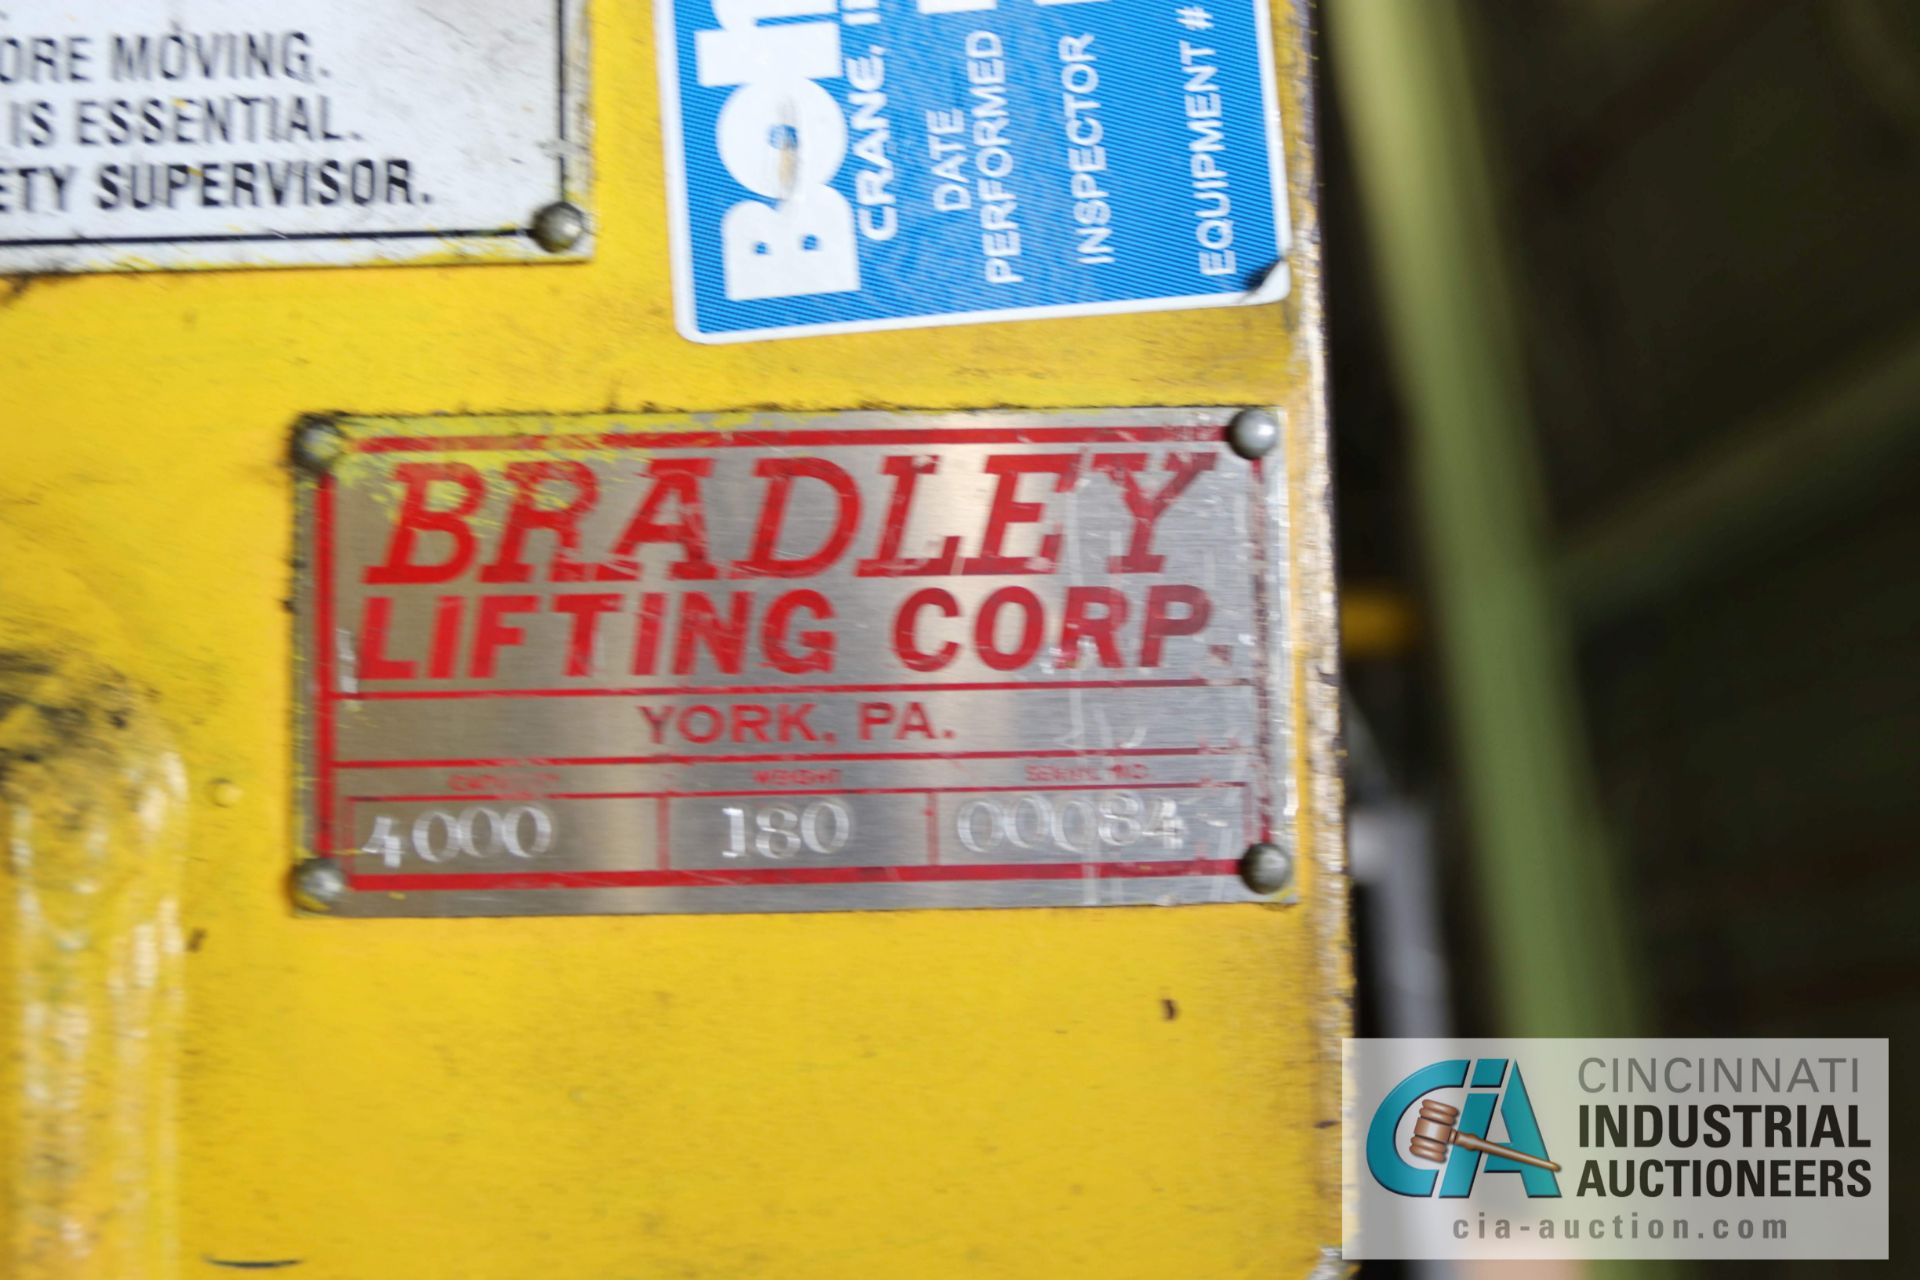 4,000 LB. BRADLEY COIL LIFT C HOOK; 17" PICK TONGUE, 18" HEIGHT INSIDE C - $20.00 Rigging Fee Due to - Image 2 of 2